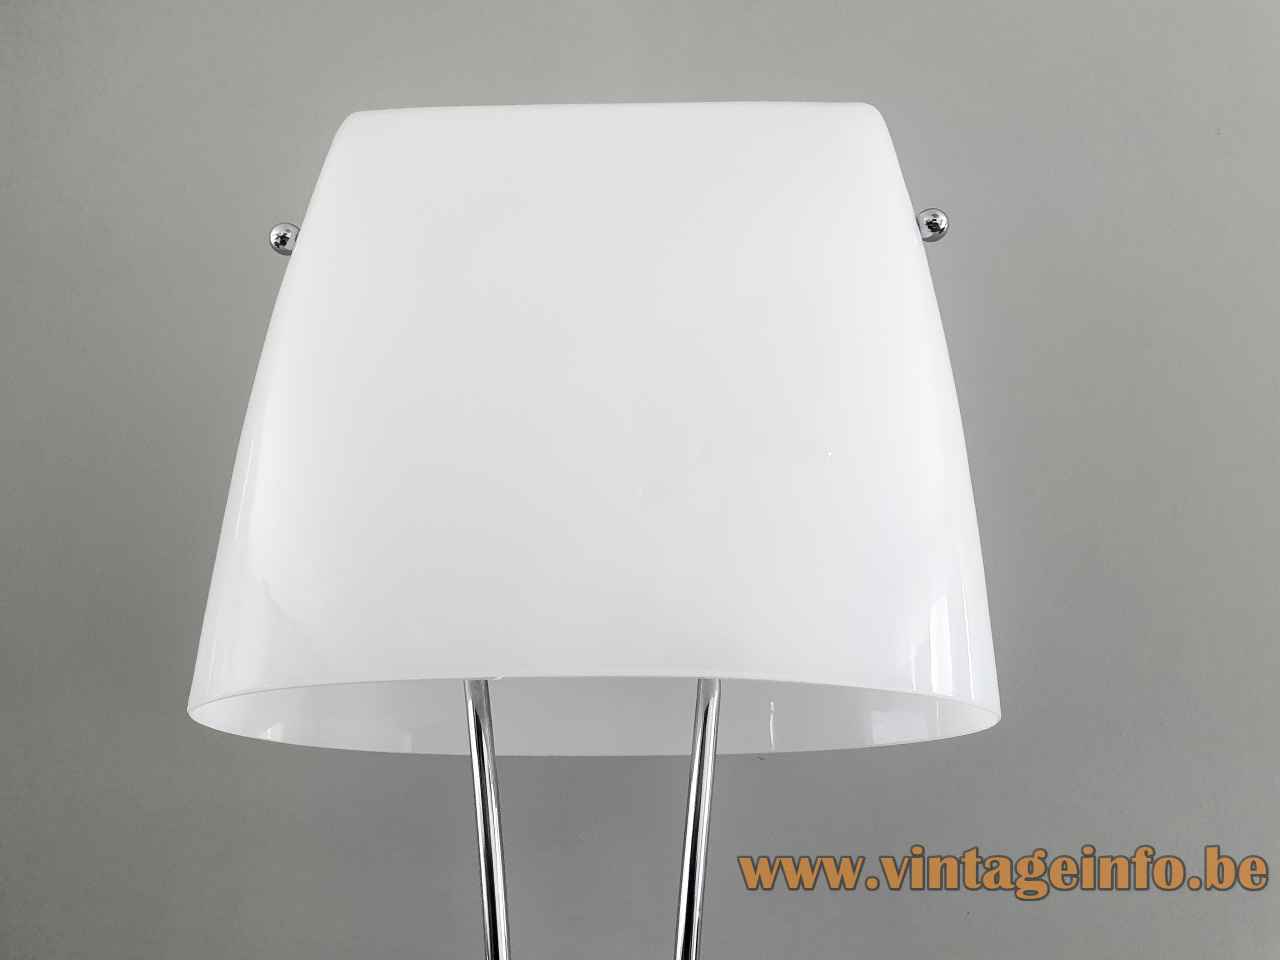 VeArt Masha table lamp conical white opal glass lampshade 1990s design: Jeannot Cerutti Artemide Italy